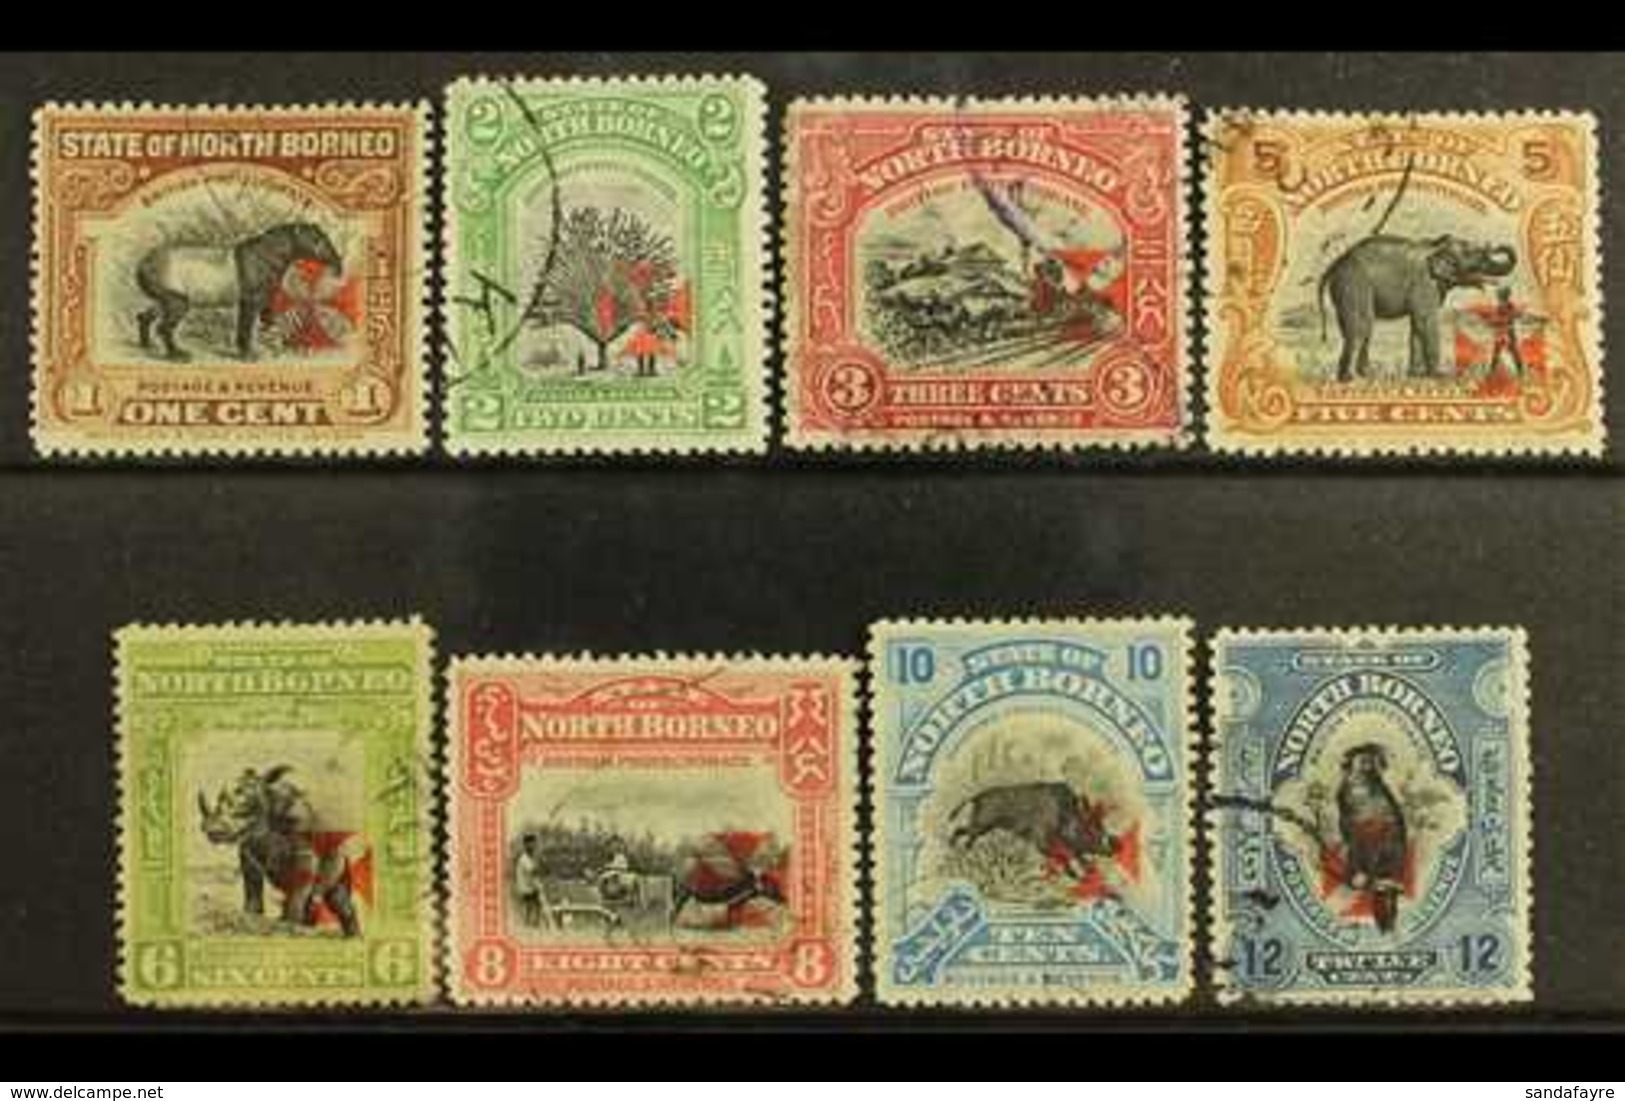 1916  Red Cross Overprints In Carmine Set To 12c (no 4c Carmine), SG 202/209 (no 204a), Very Fine Used. (8 Stamps) For M - Bornéo Du Nord (...-1963)